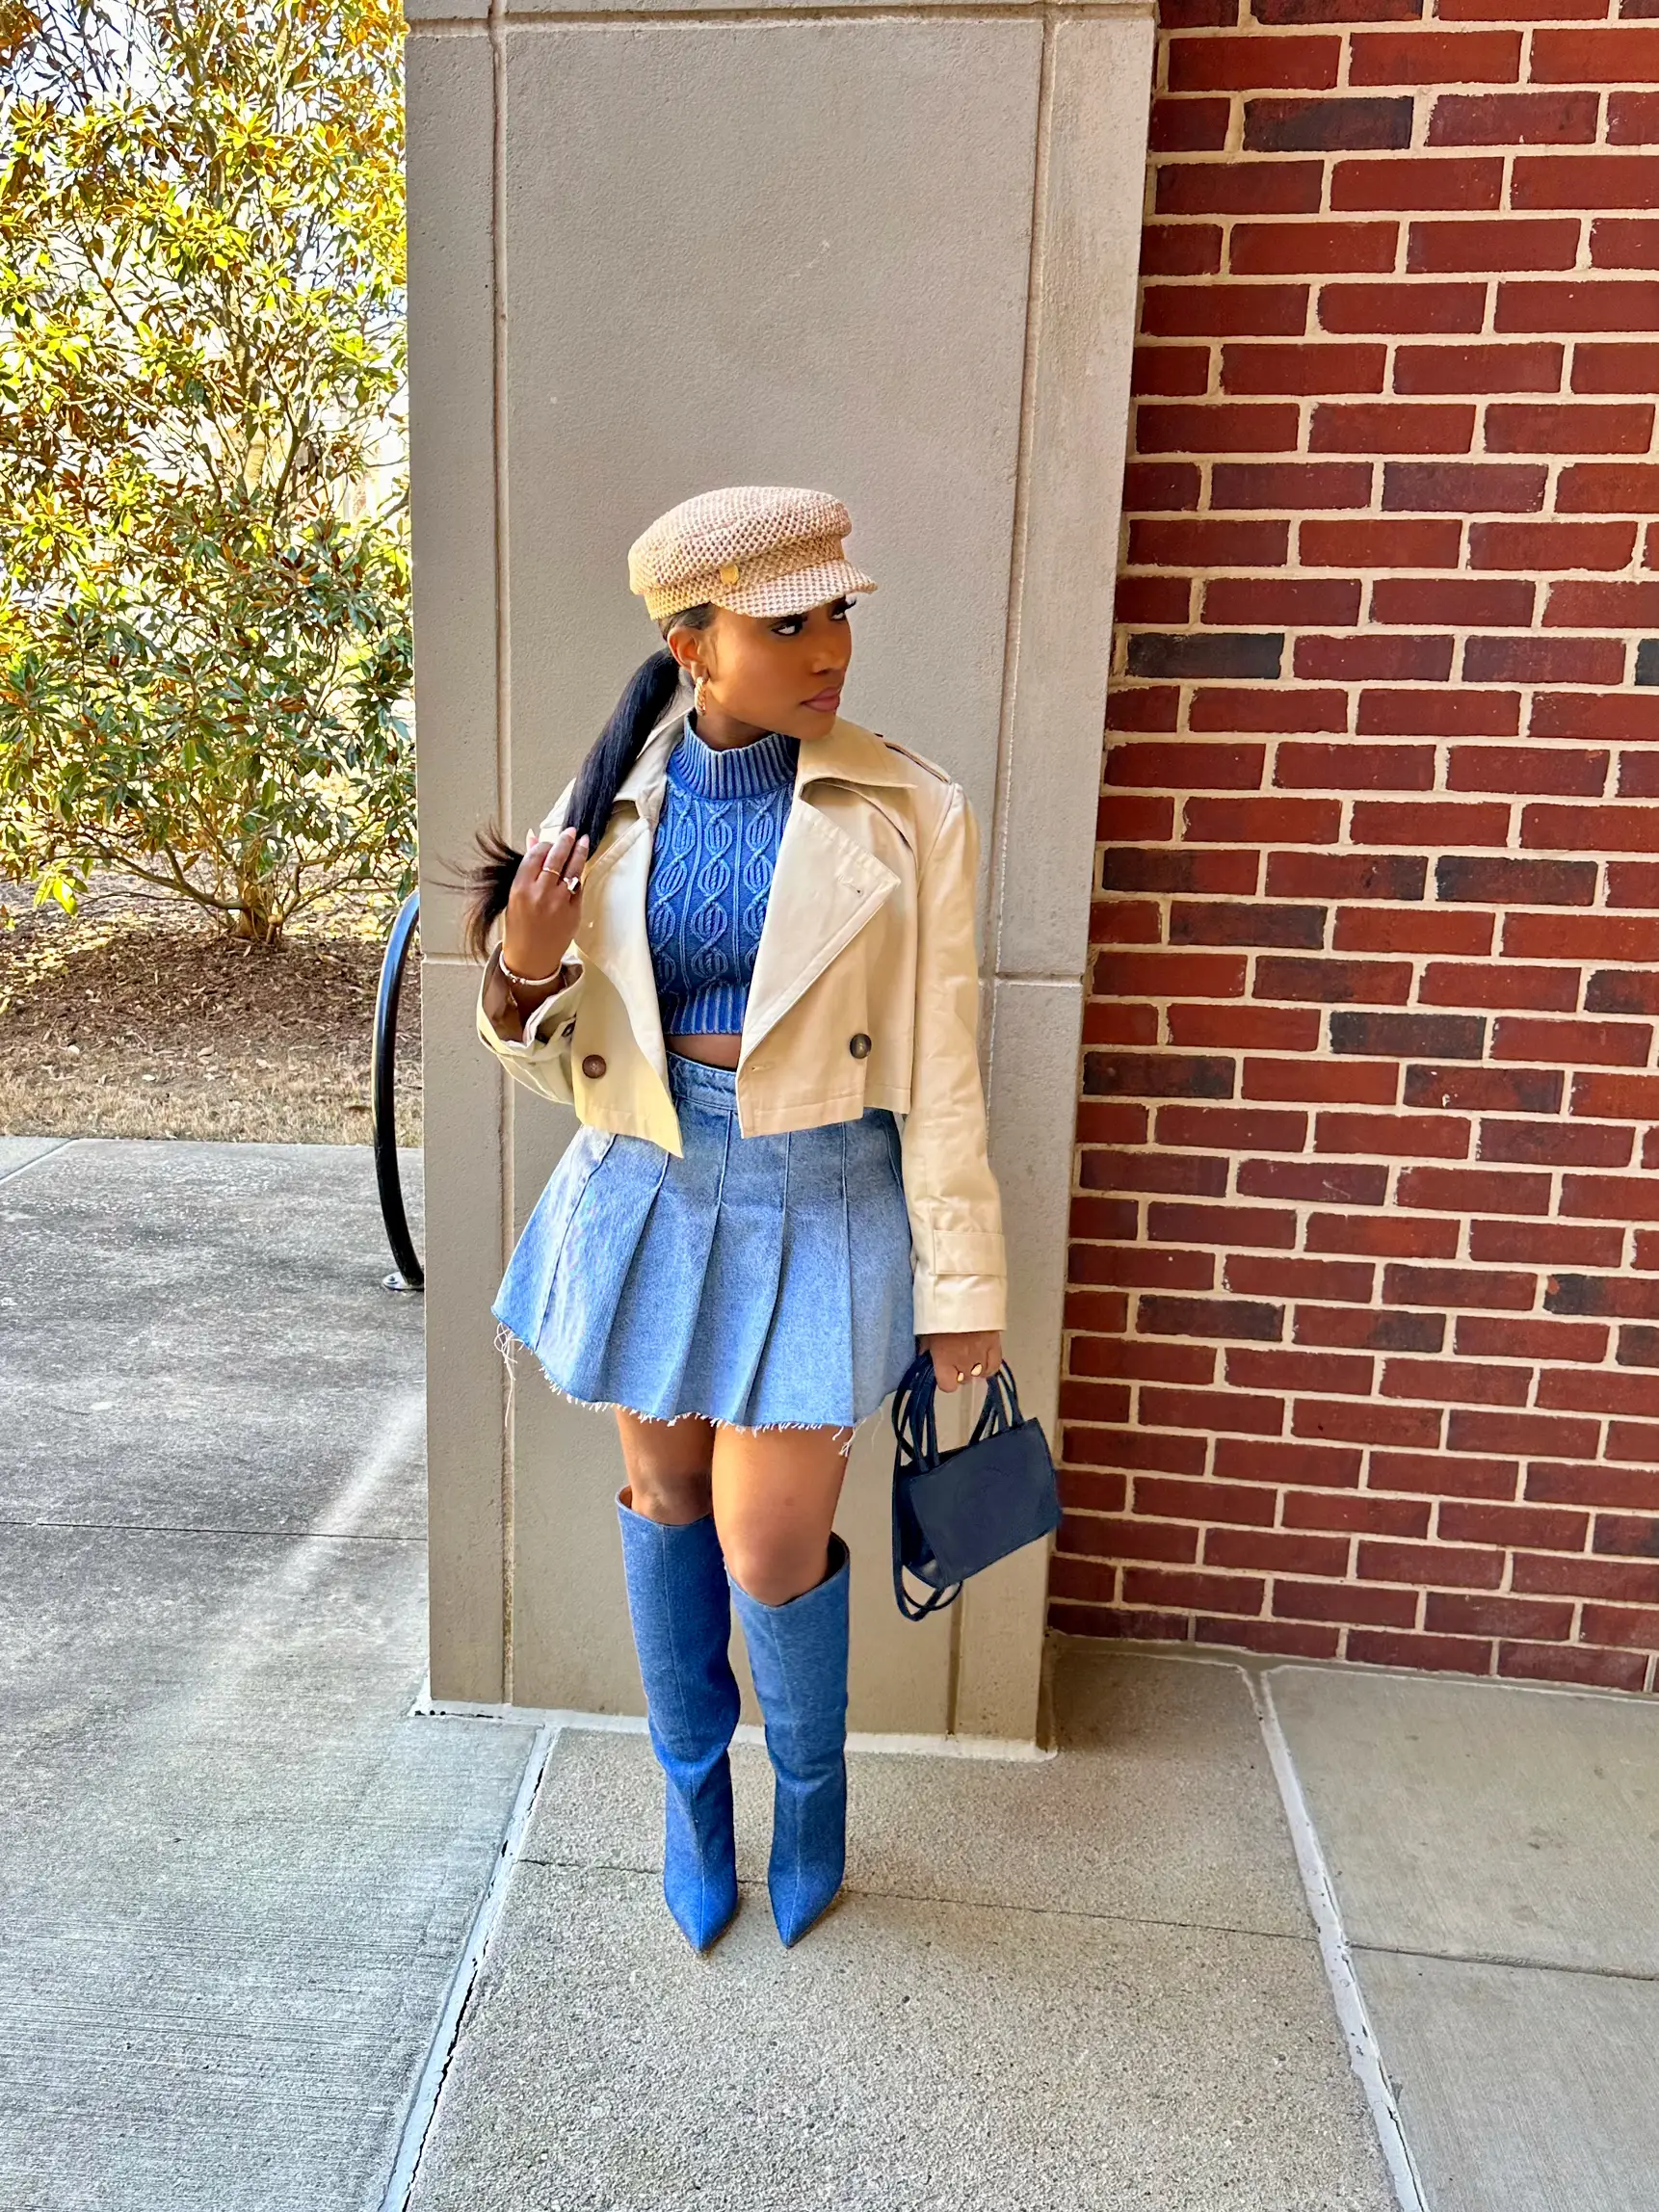 Denim Mini Skirt and Boot Style, Gallery posted by Jessica Bell